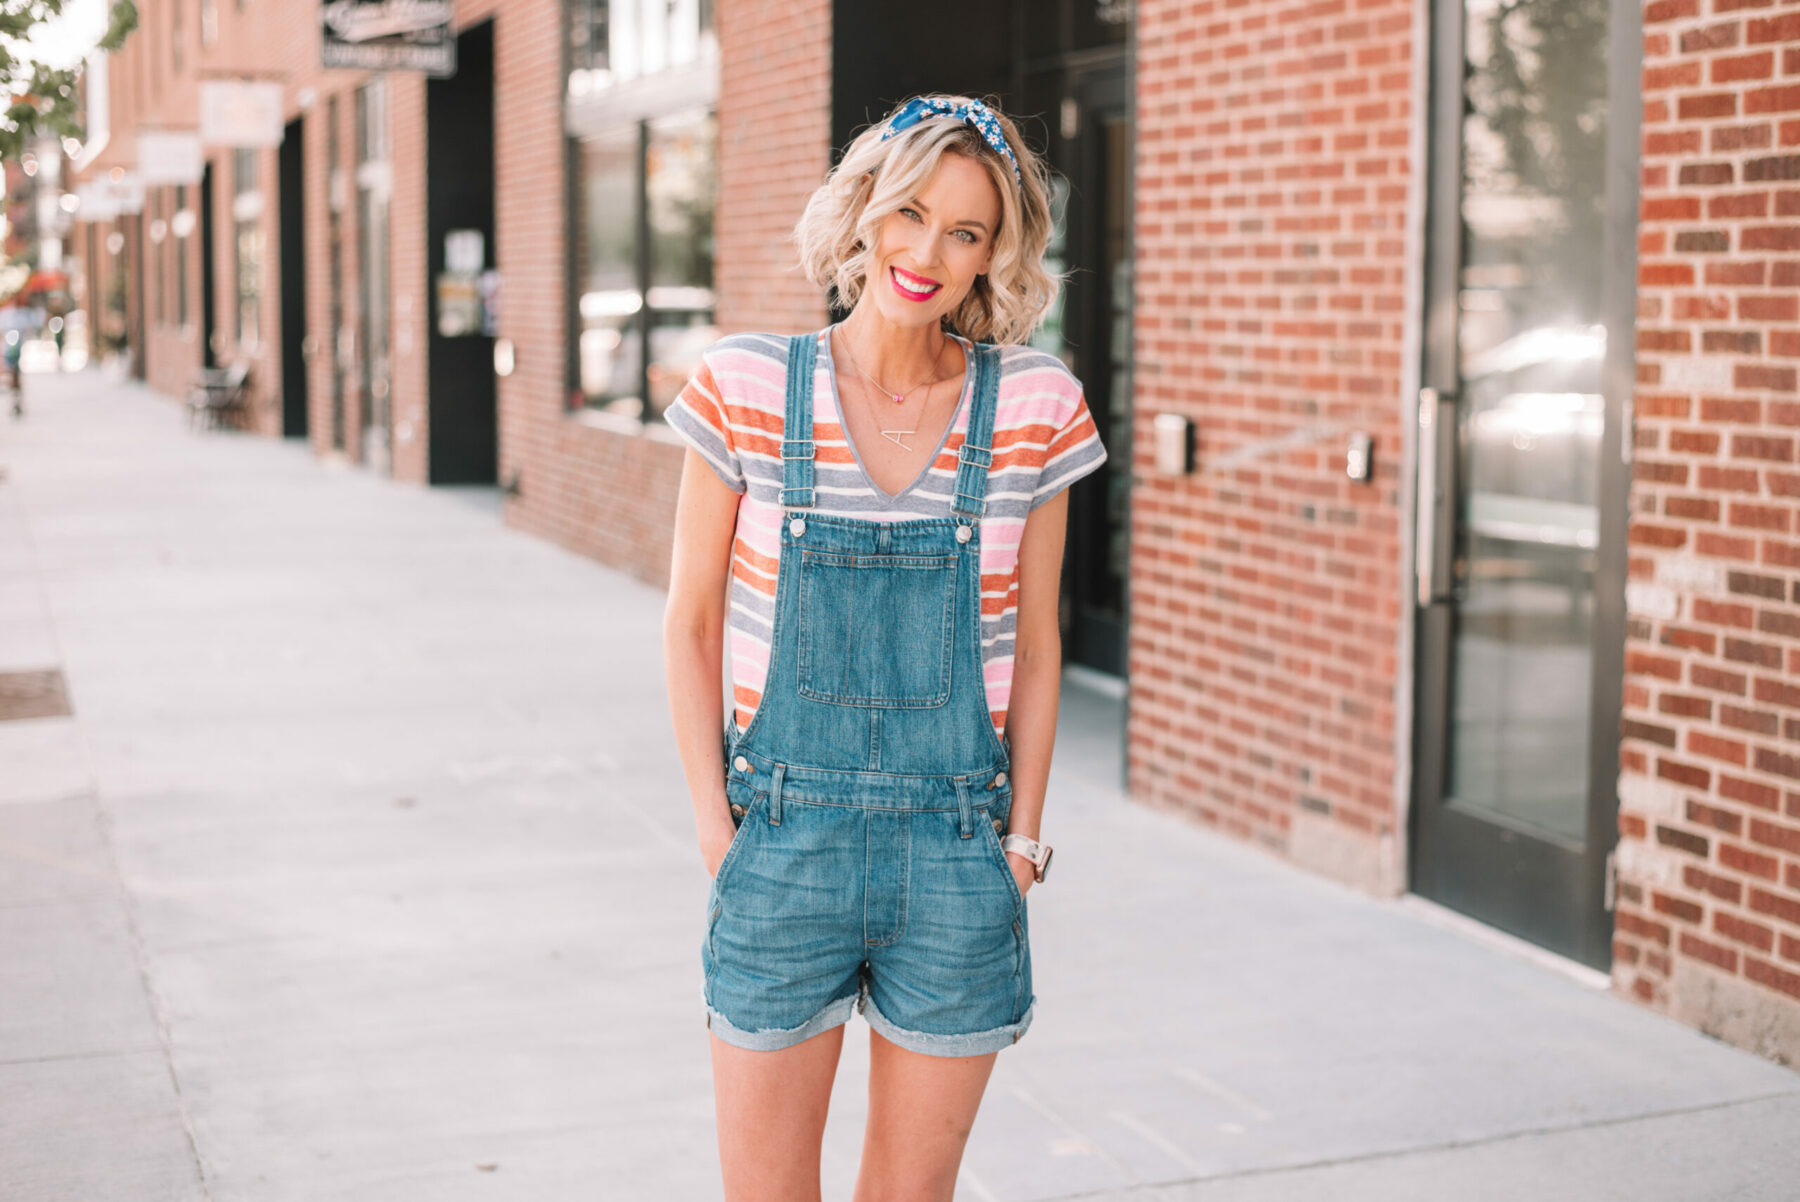 How to Wear Overalls - Styling Tips and Tricks to Avoid Looking